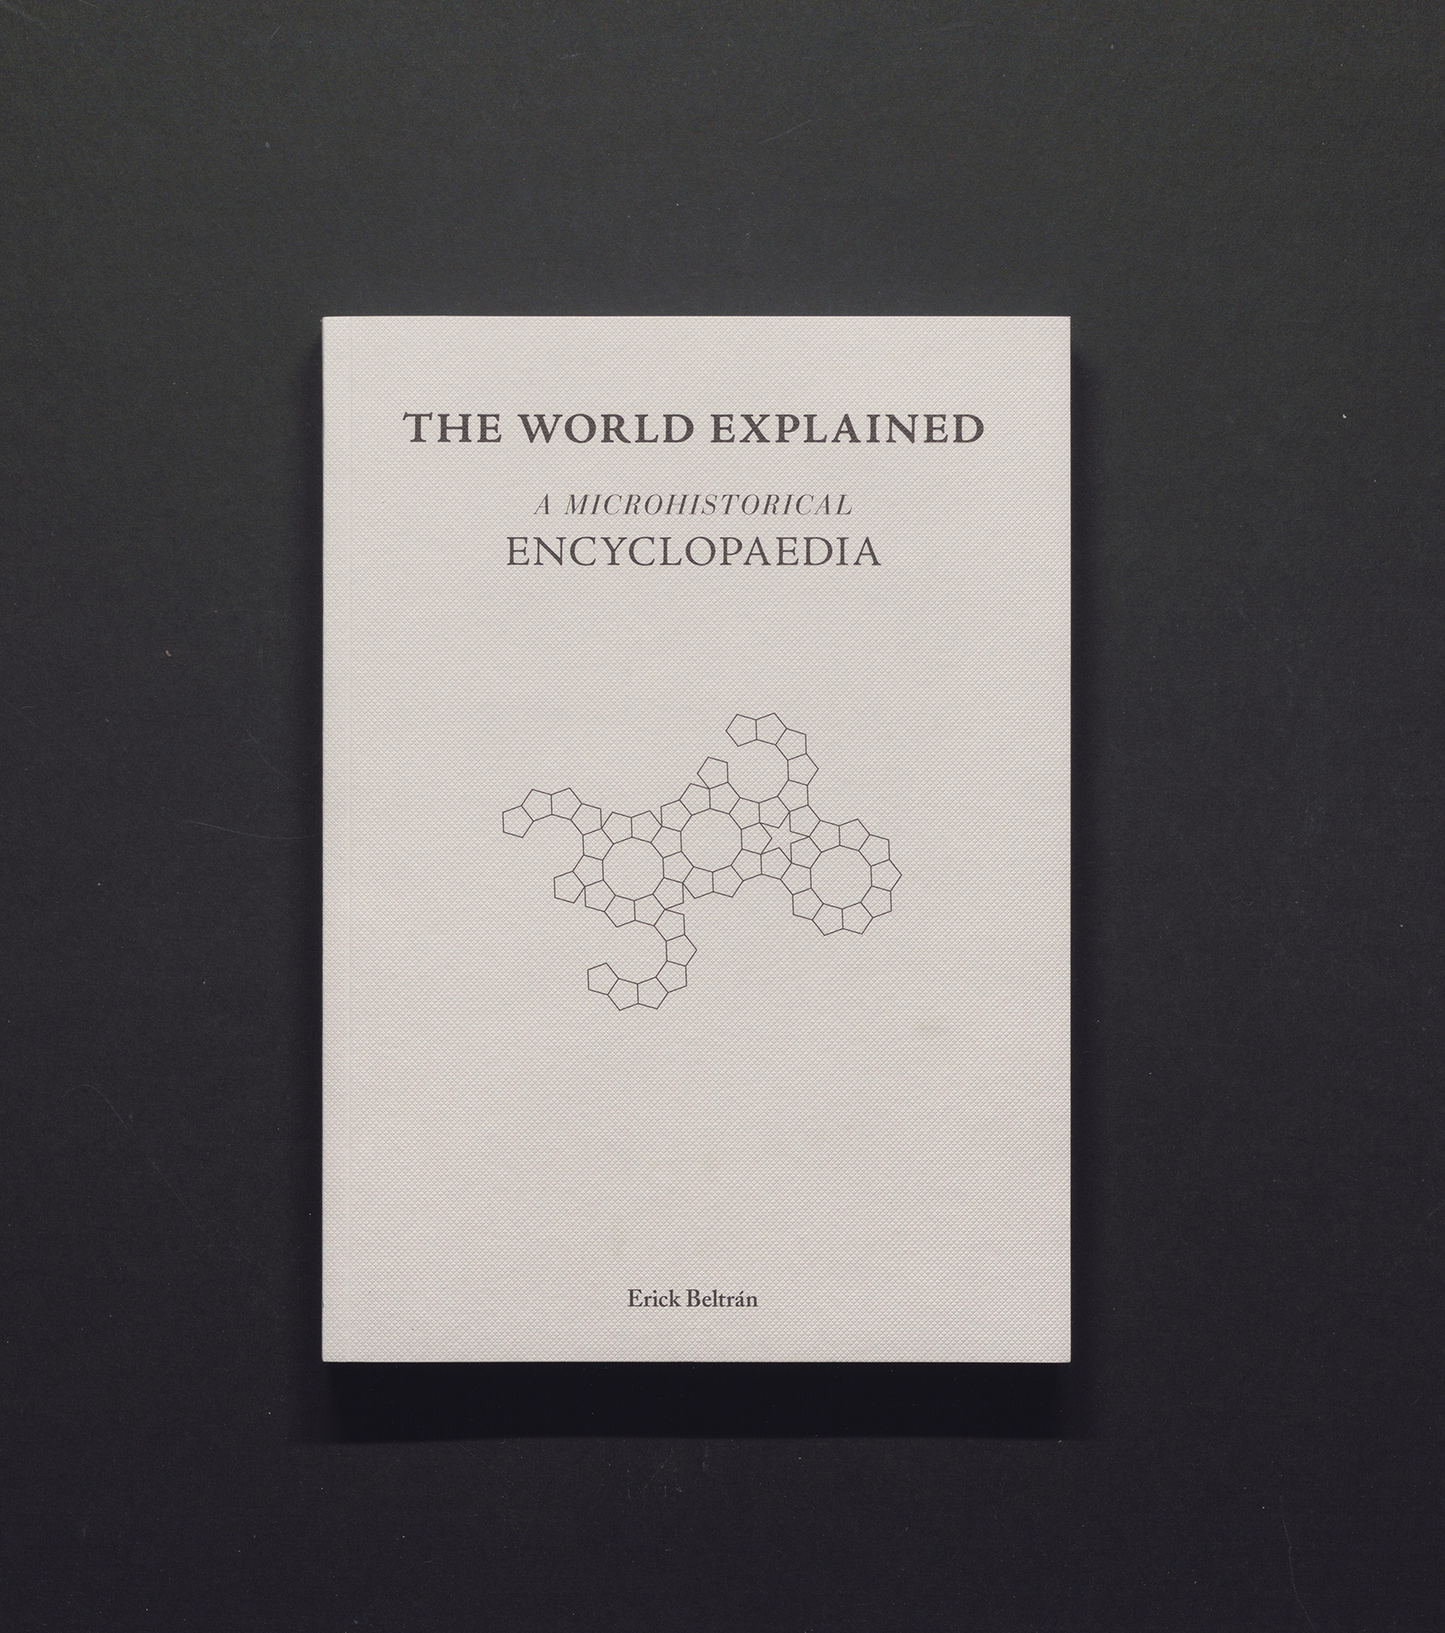 The World Explained - A Microhistorical Encyclopedia